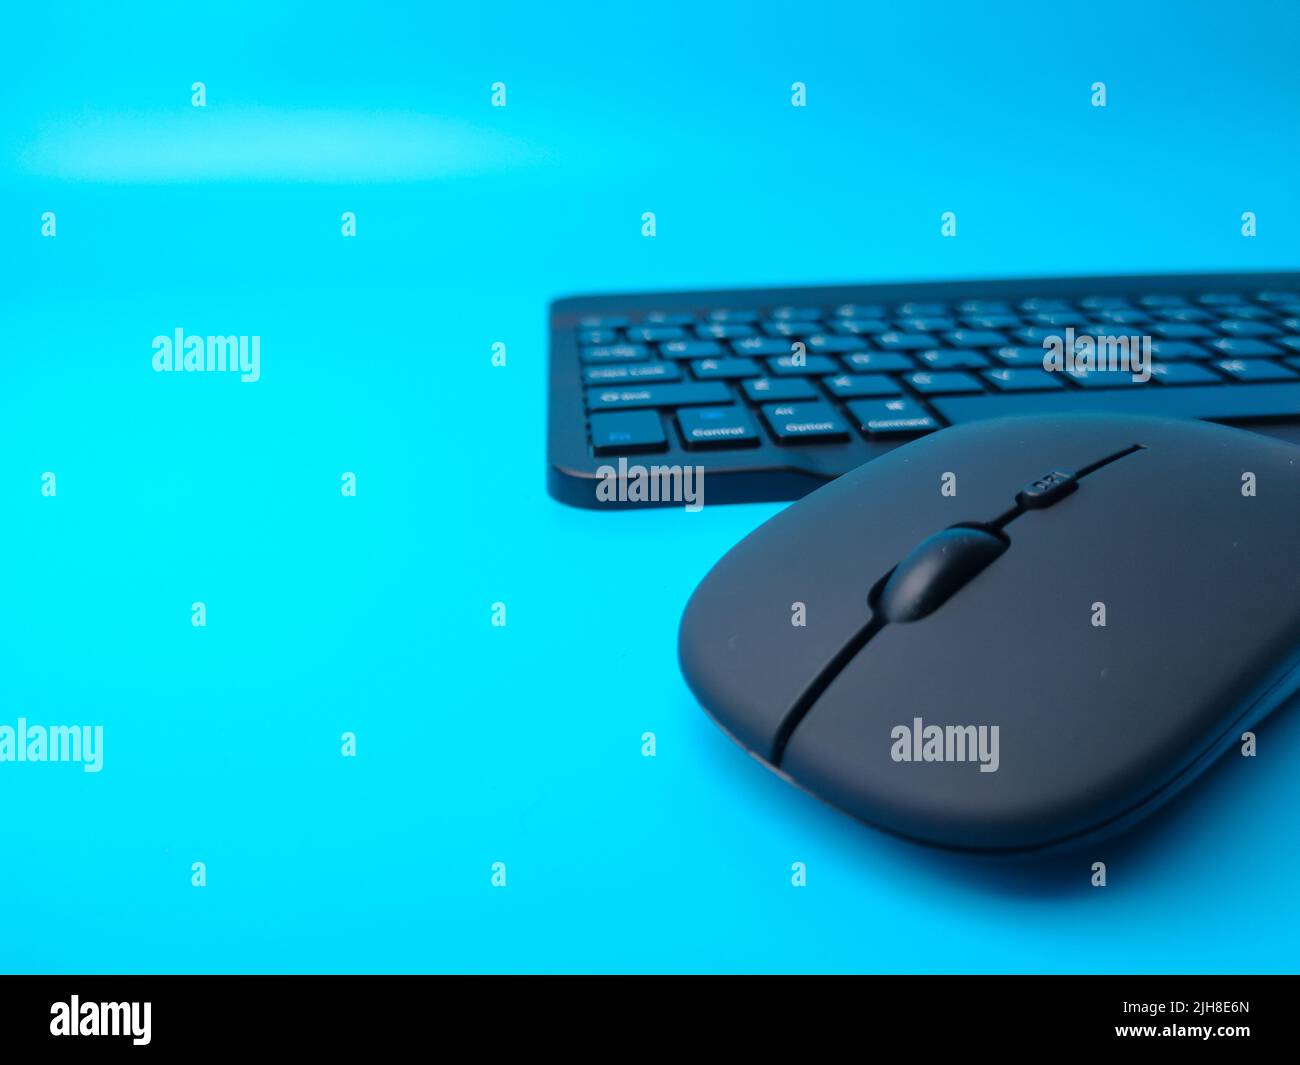 A black Bluetooth wireless keyboard and wireless mouse on a blue background Stock Photo